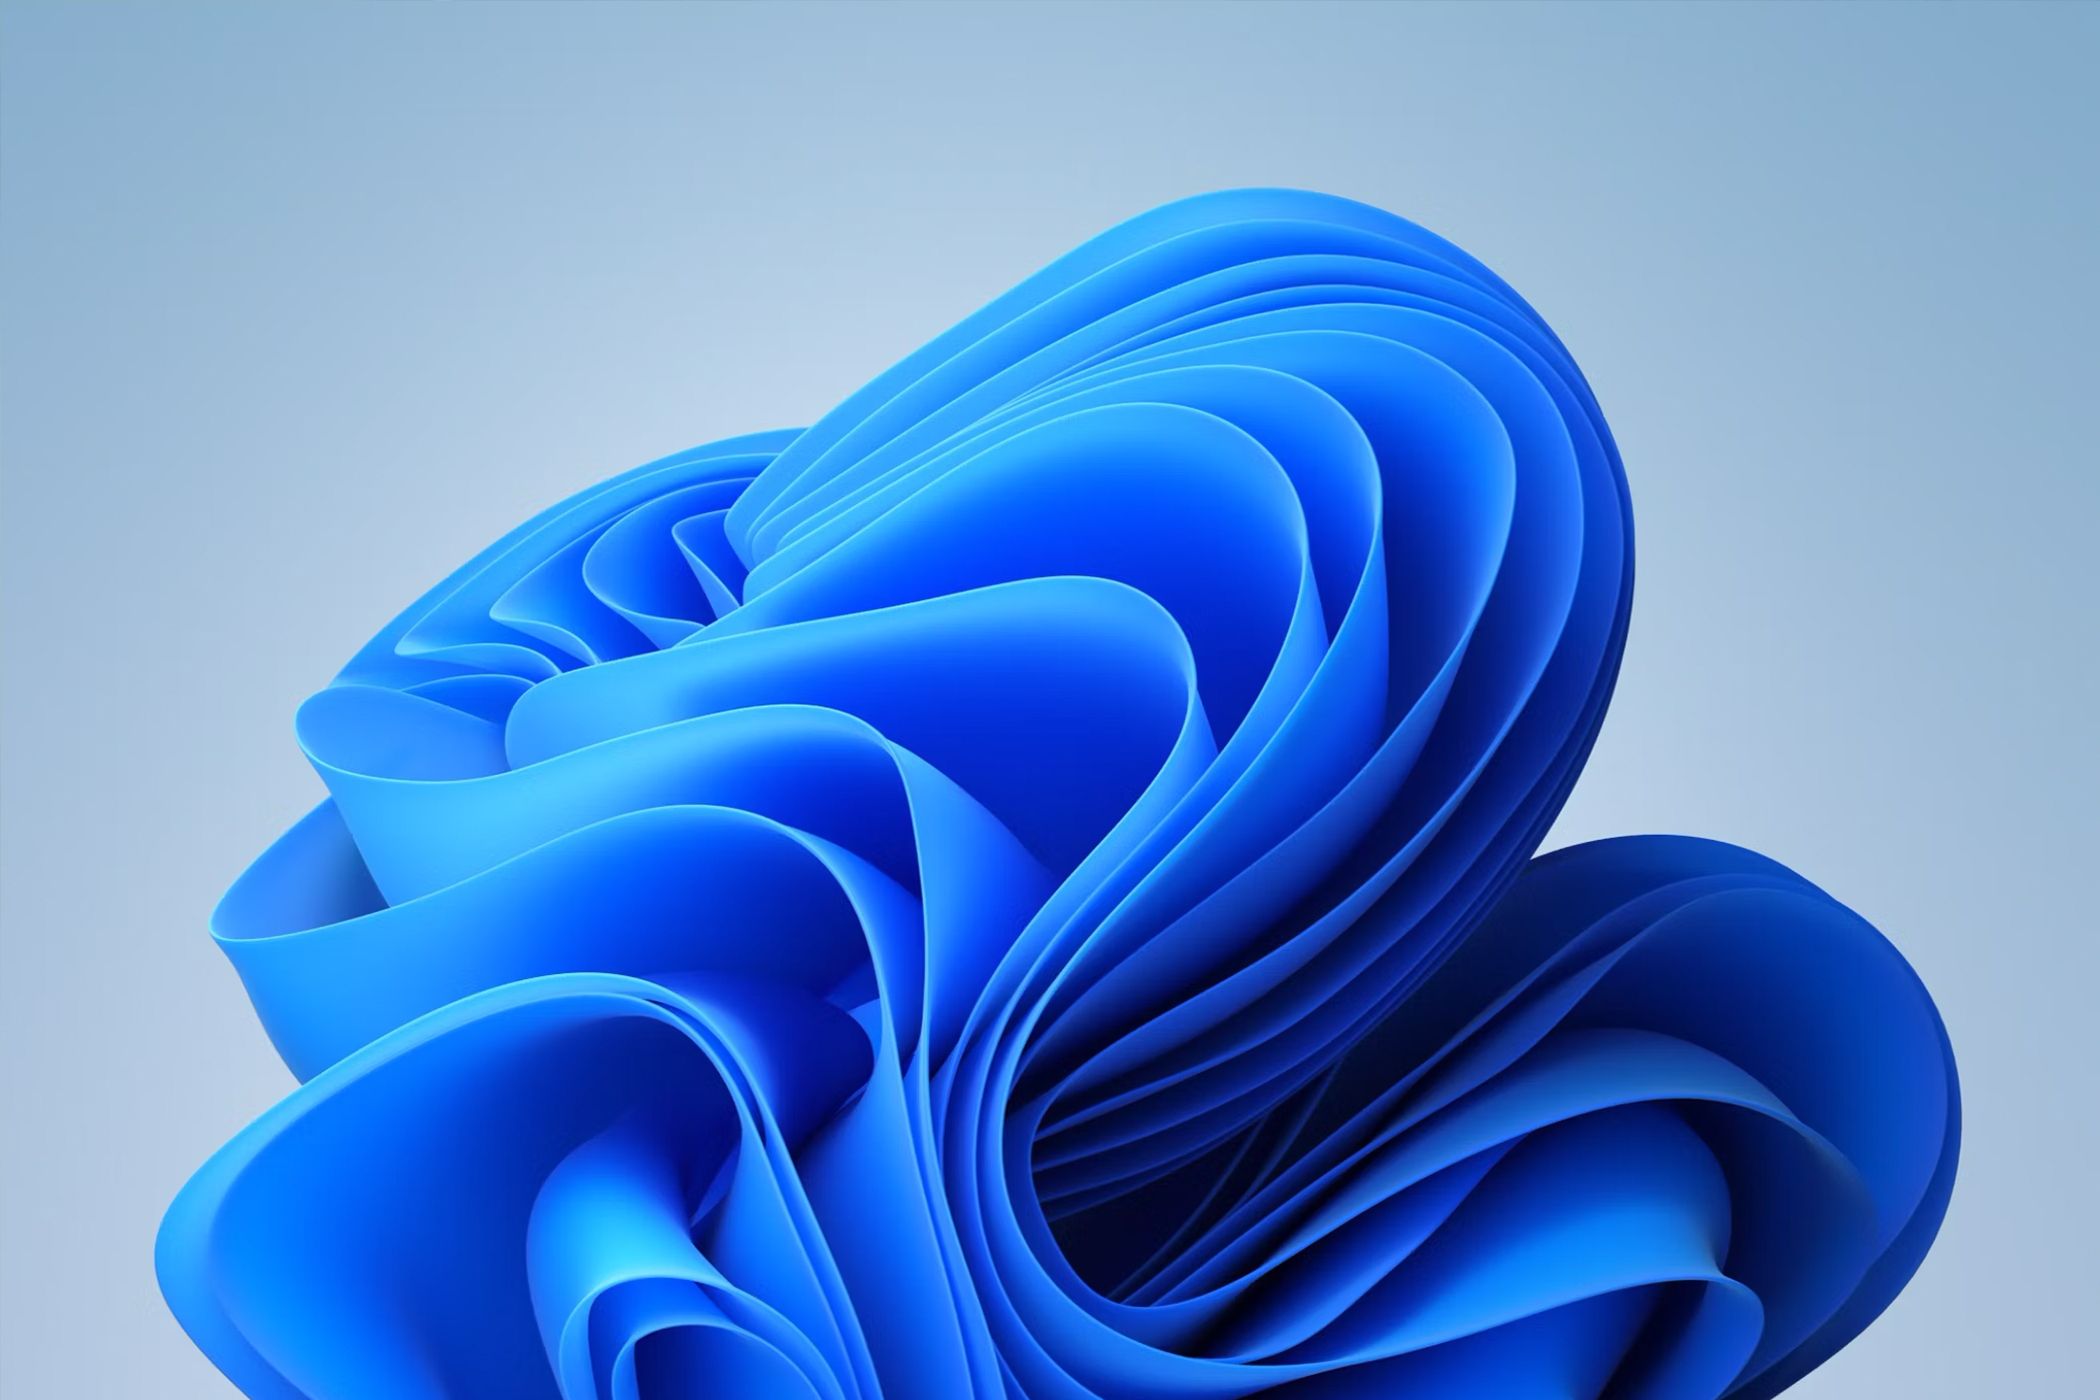 The default blue swirl pattern of the Windows 11 background.